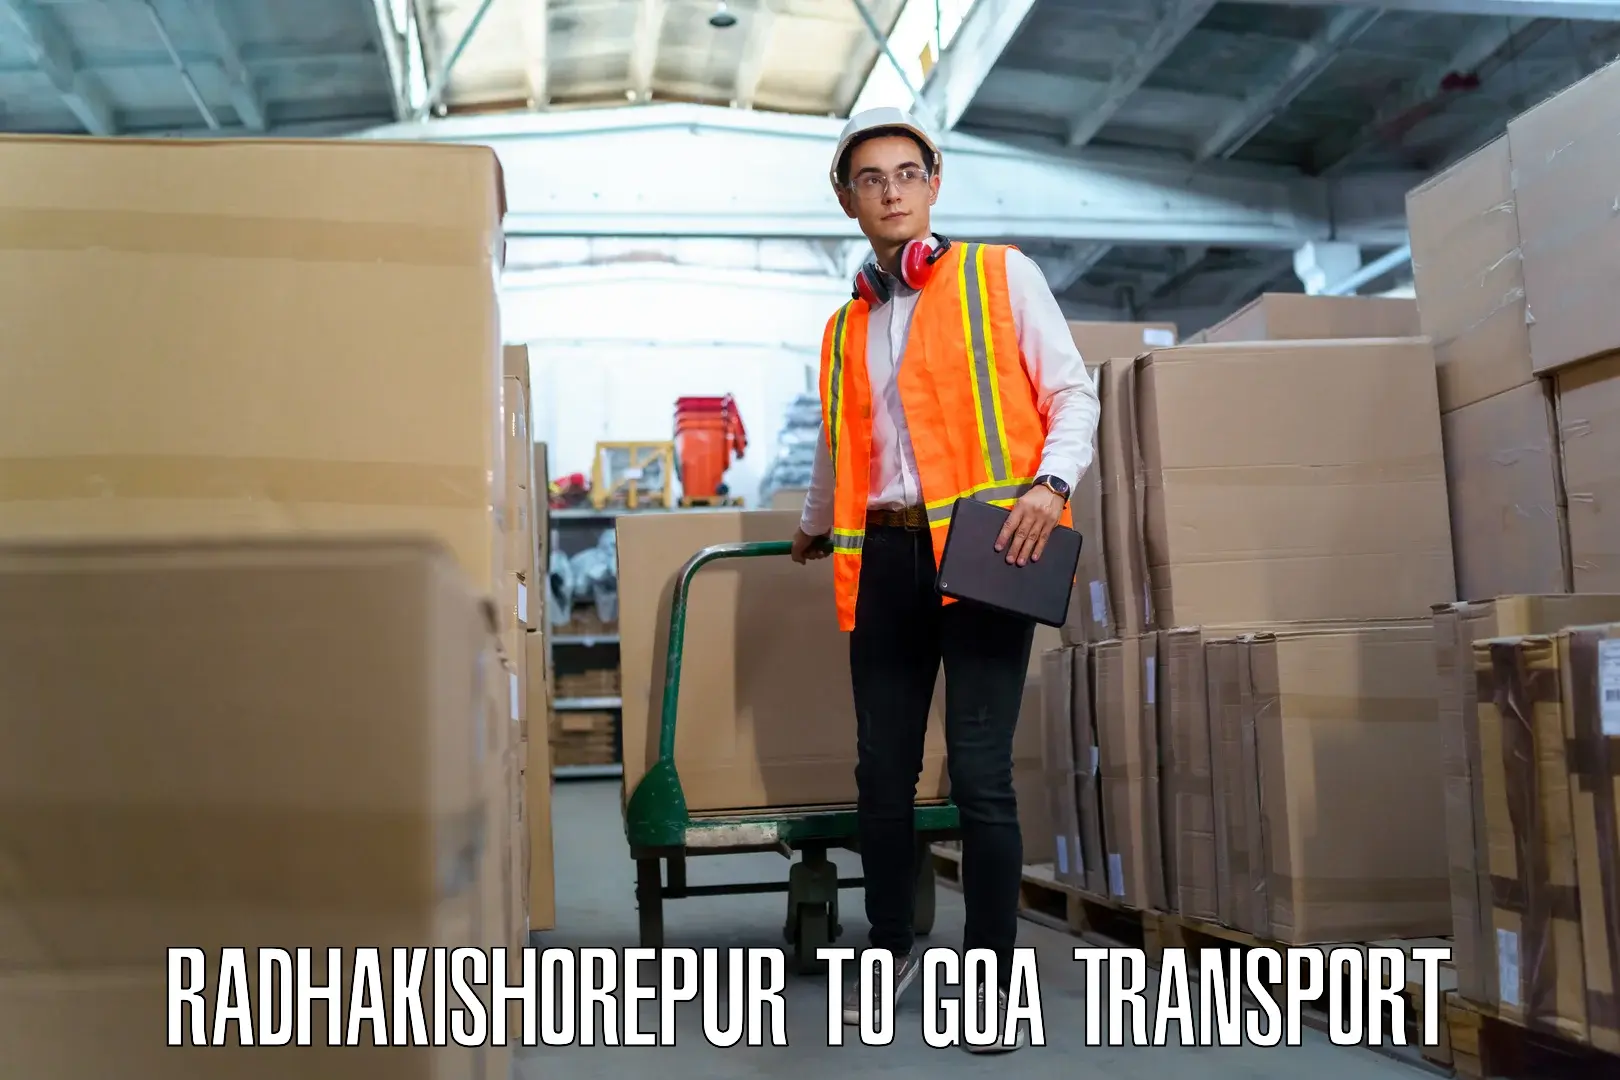 Transport bike from one state to another Radhakishorepur to Goa